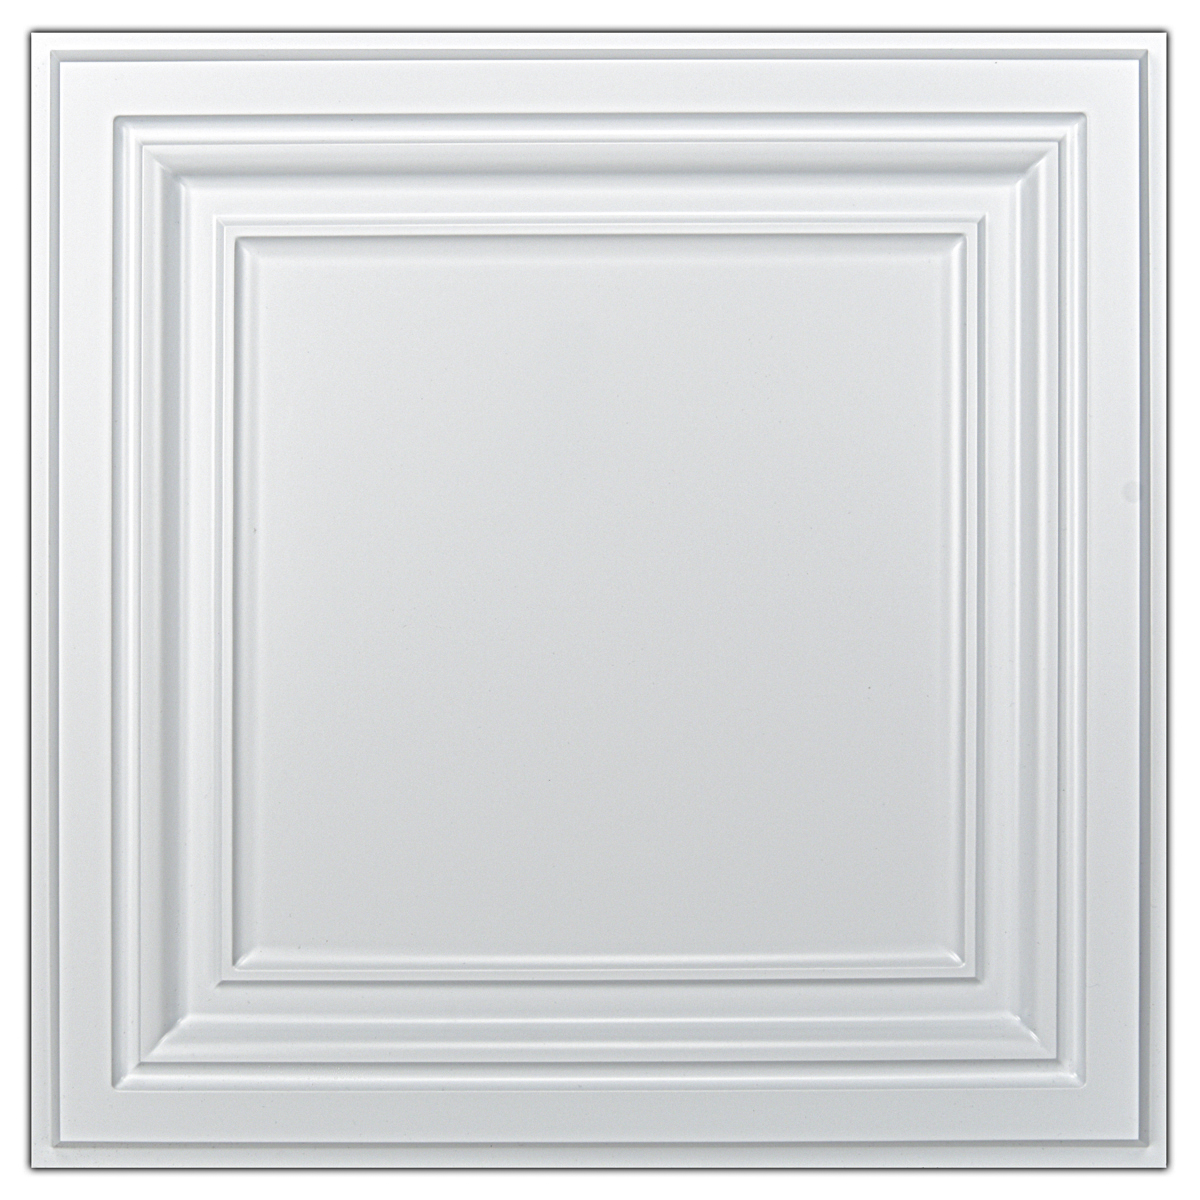 A10905P12 -Decorative Ceiling Tile 2x2 Glue up, Lay in Ceiling Tile 24x24 Pack of 12pcs Spanish in Matt White